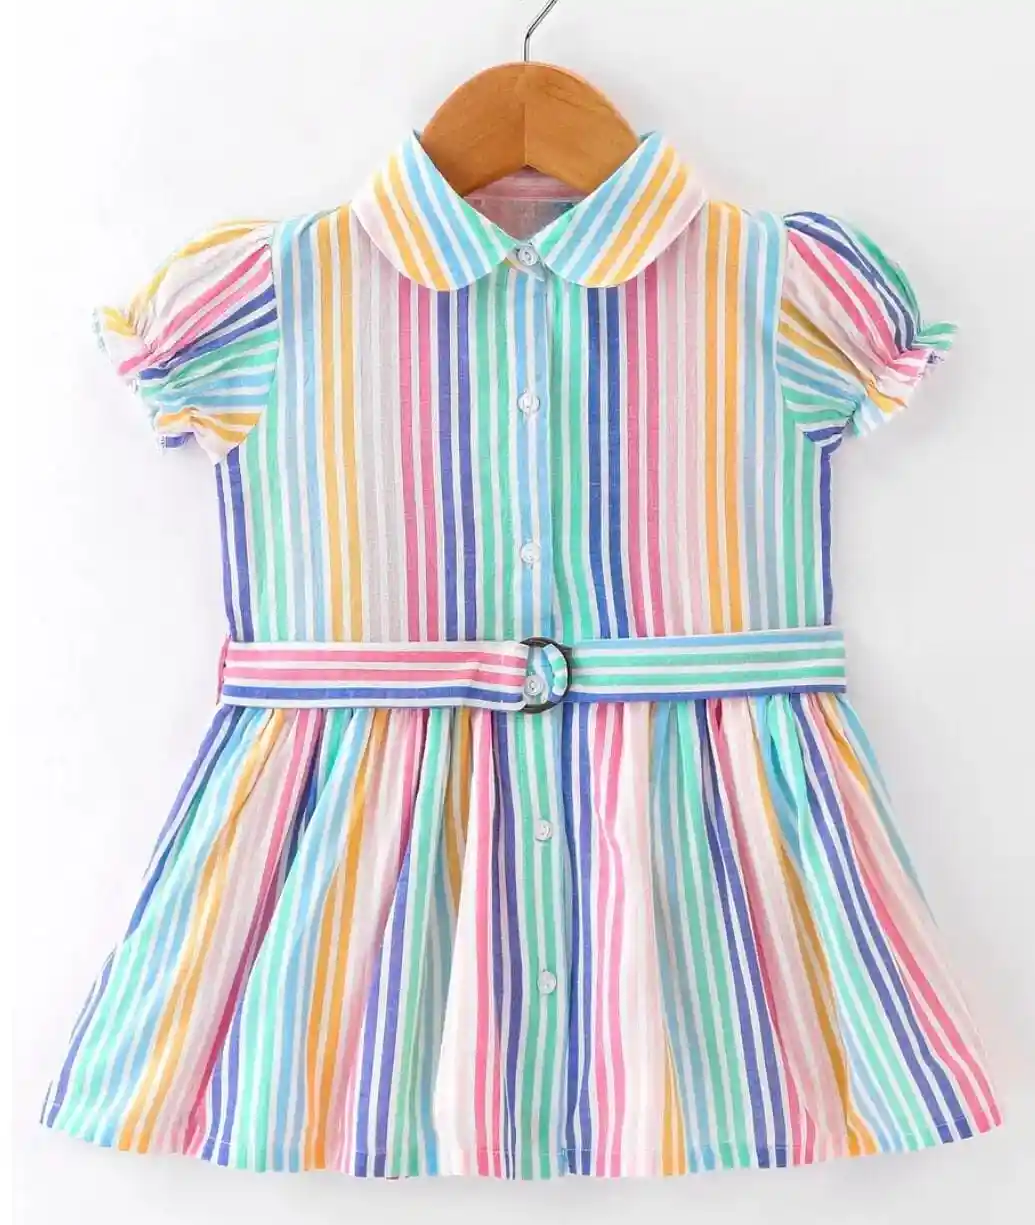 100% Cotton Woven Yarn Dyed Half Sleeves Frock Striped Pattern with Belt - Multicolor